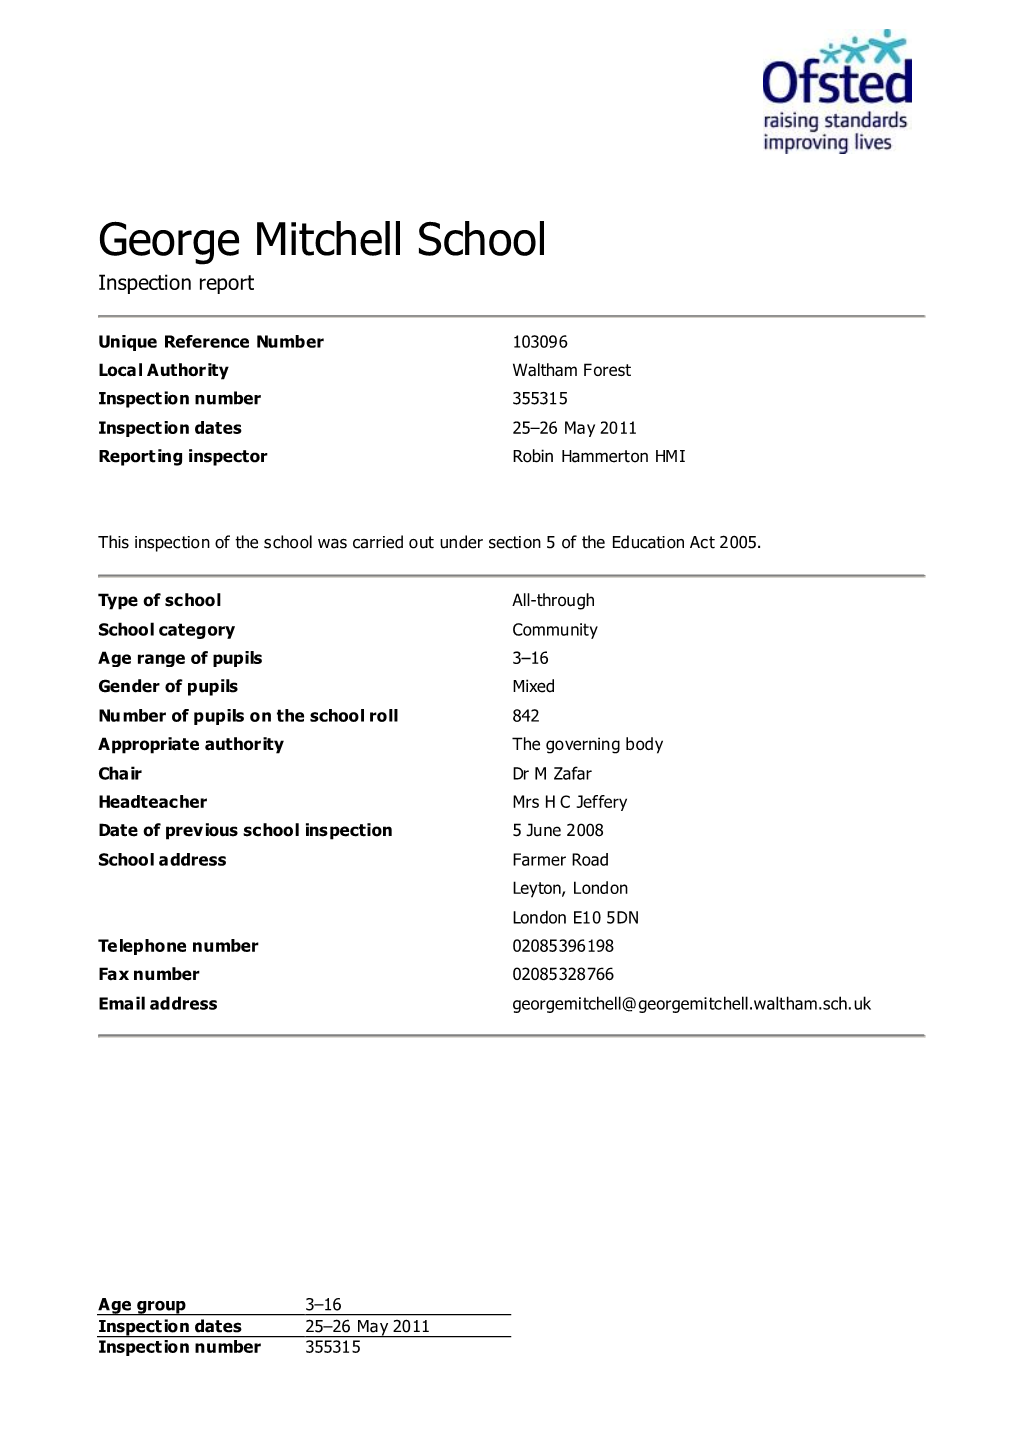 George Mitchell School Inspection Report